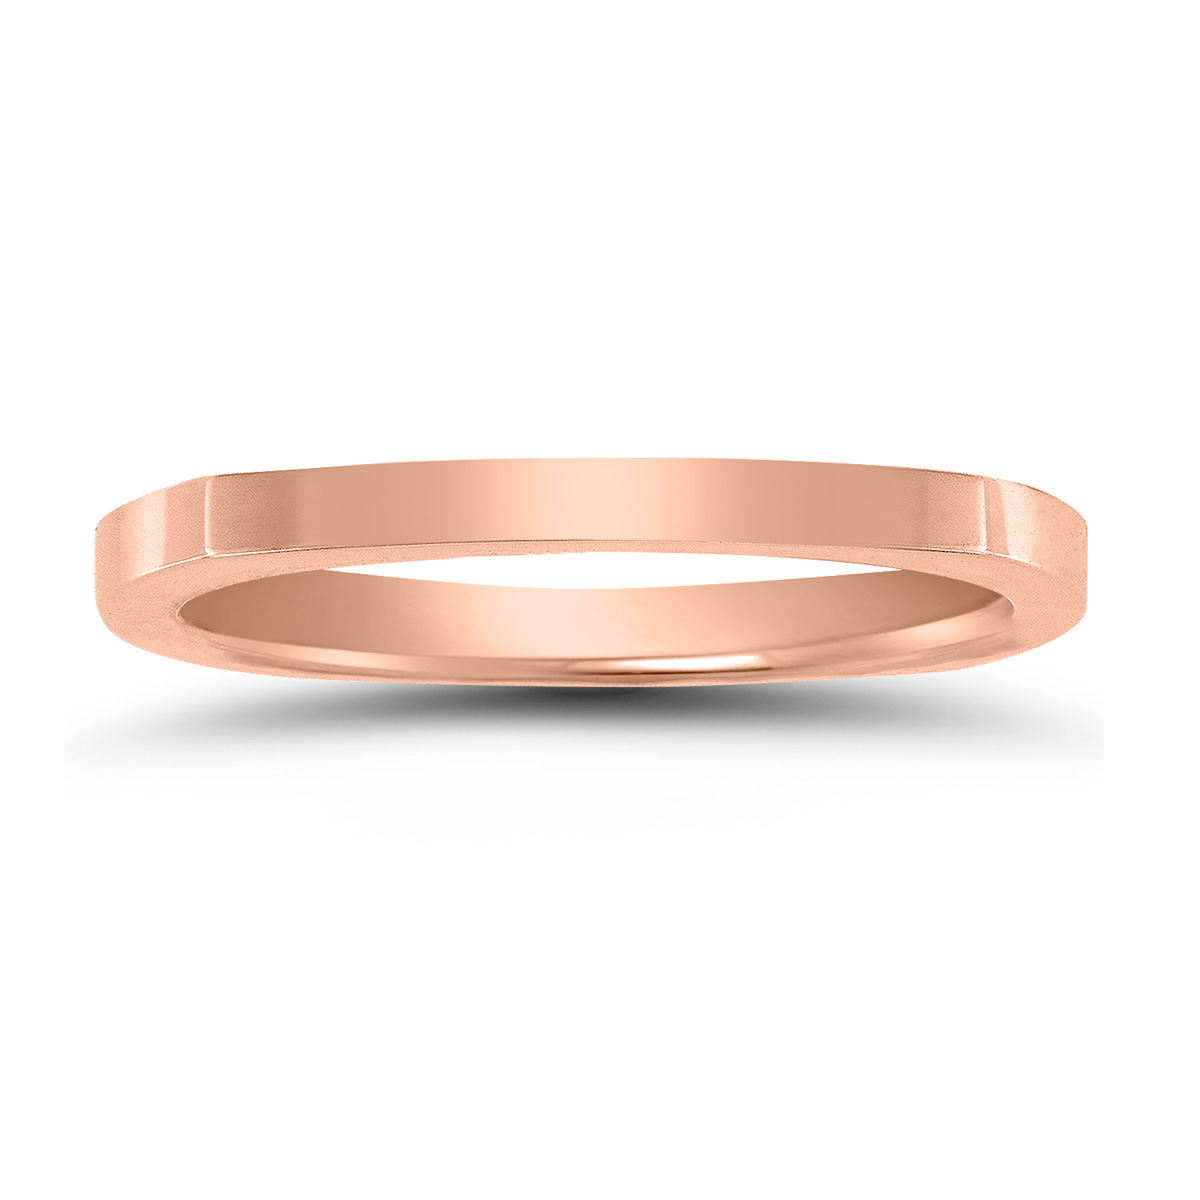 4 Sided Thin 1.5MM Wedding Band in 14K Rose Gold